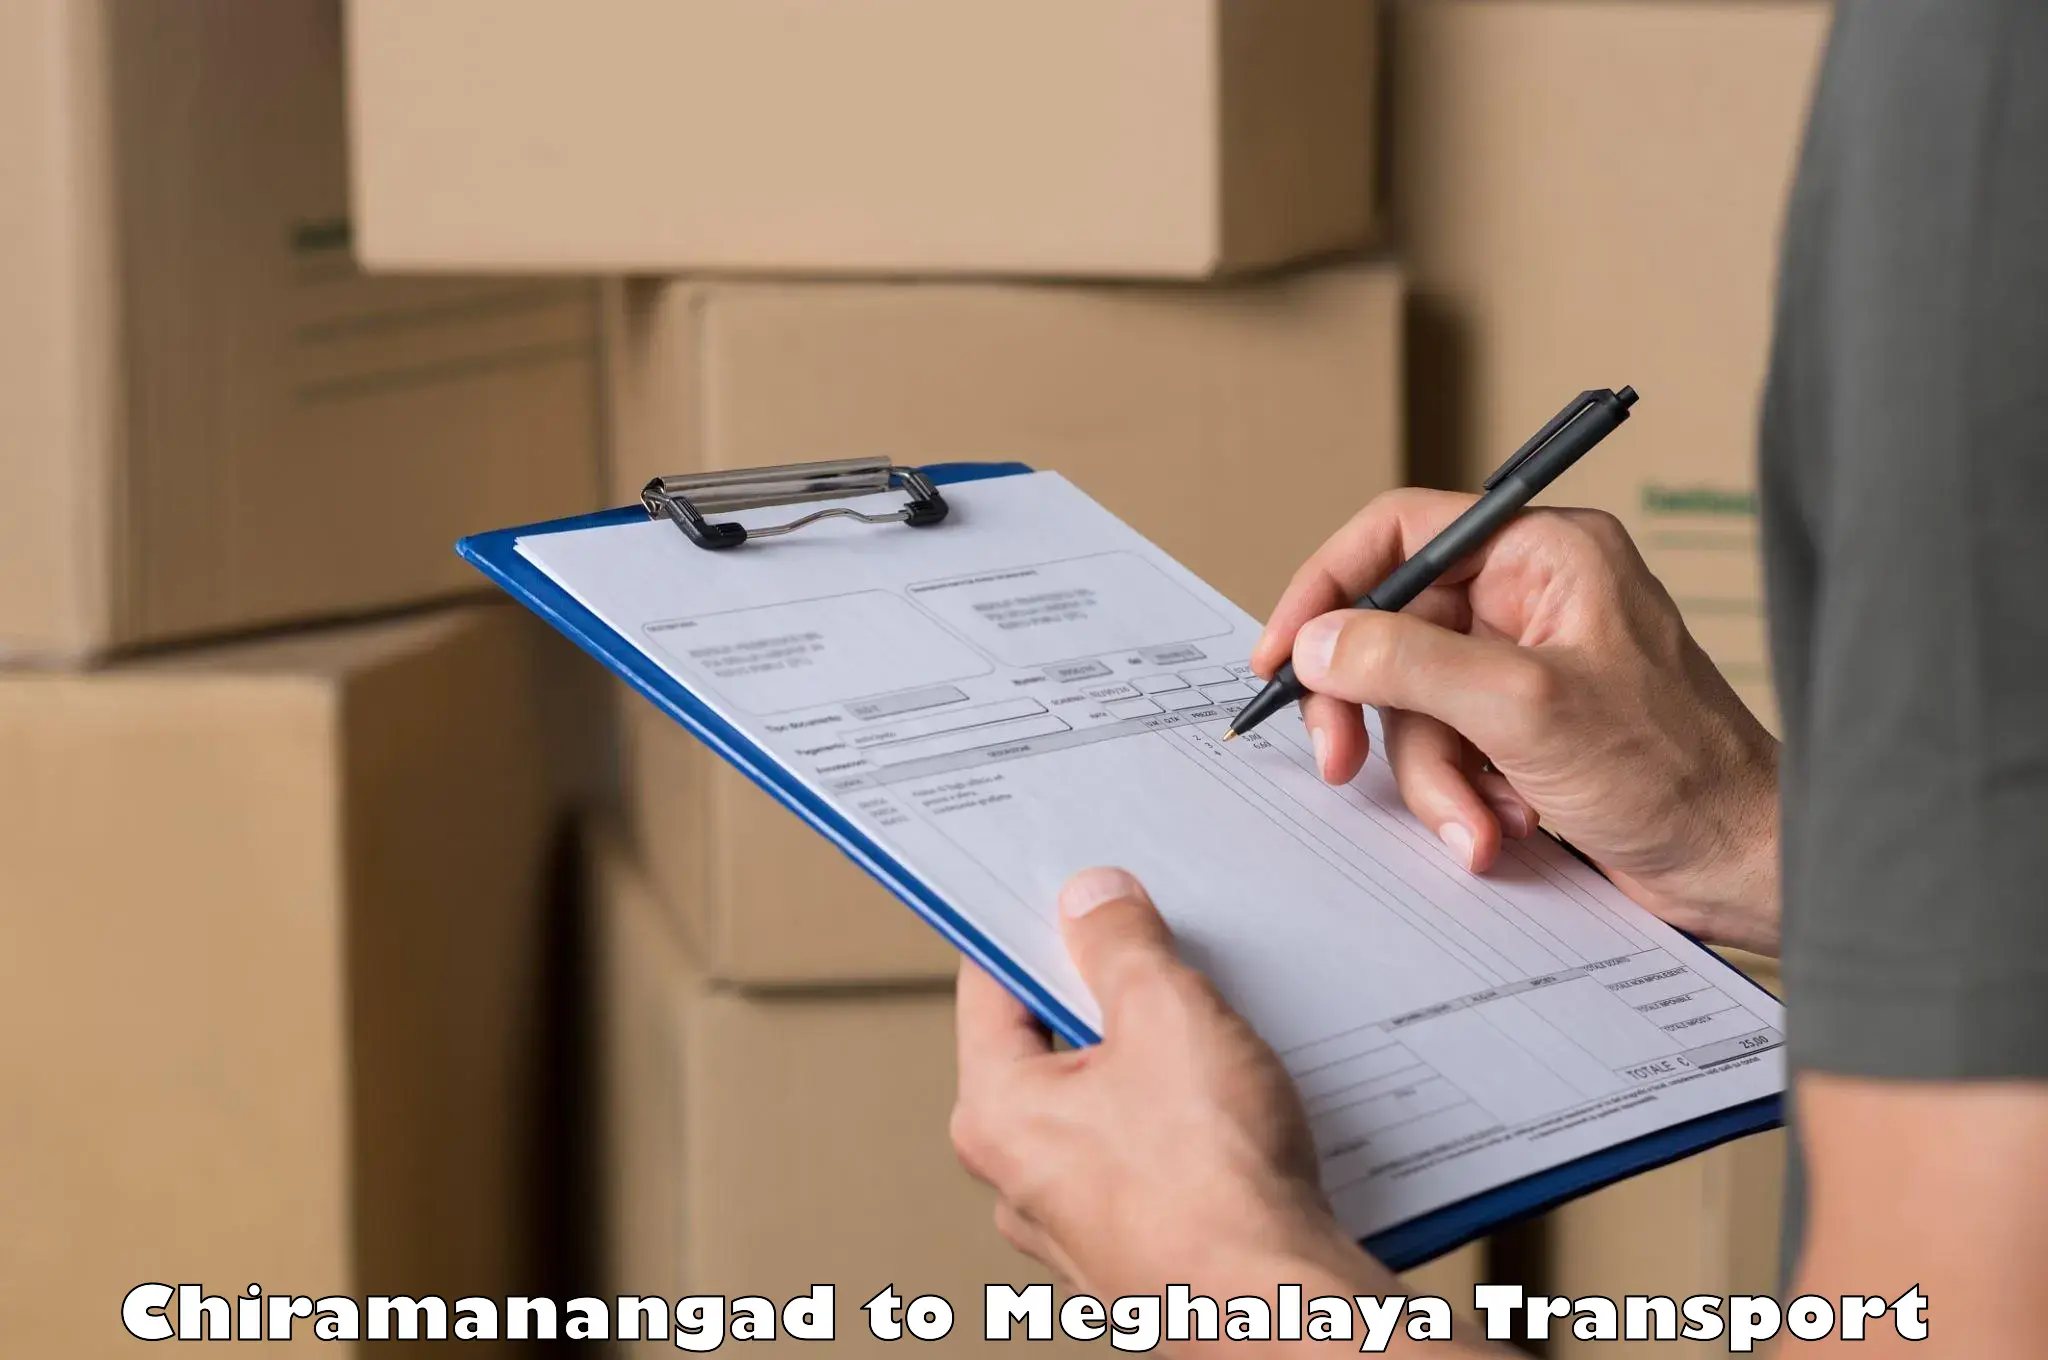 Container transport service Chiramanangad to Umsaw